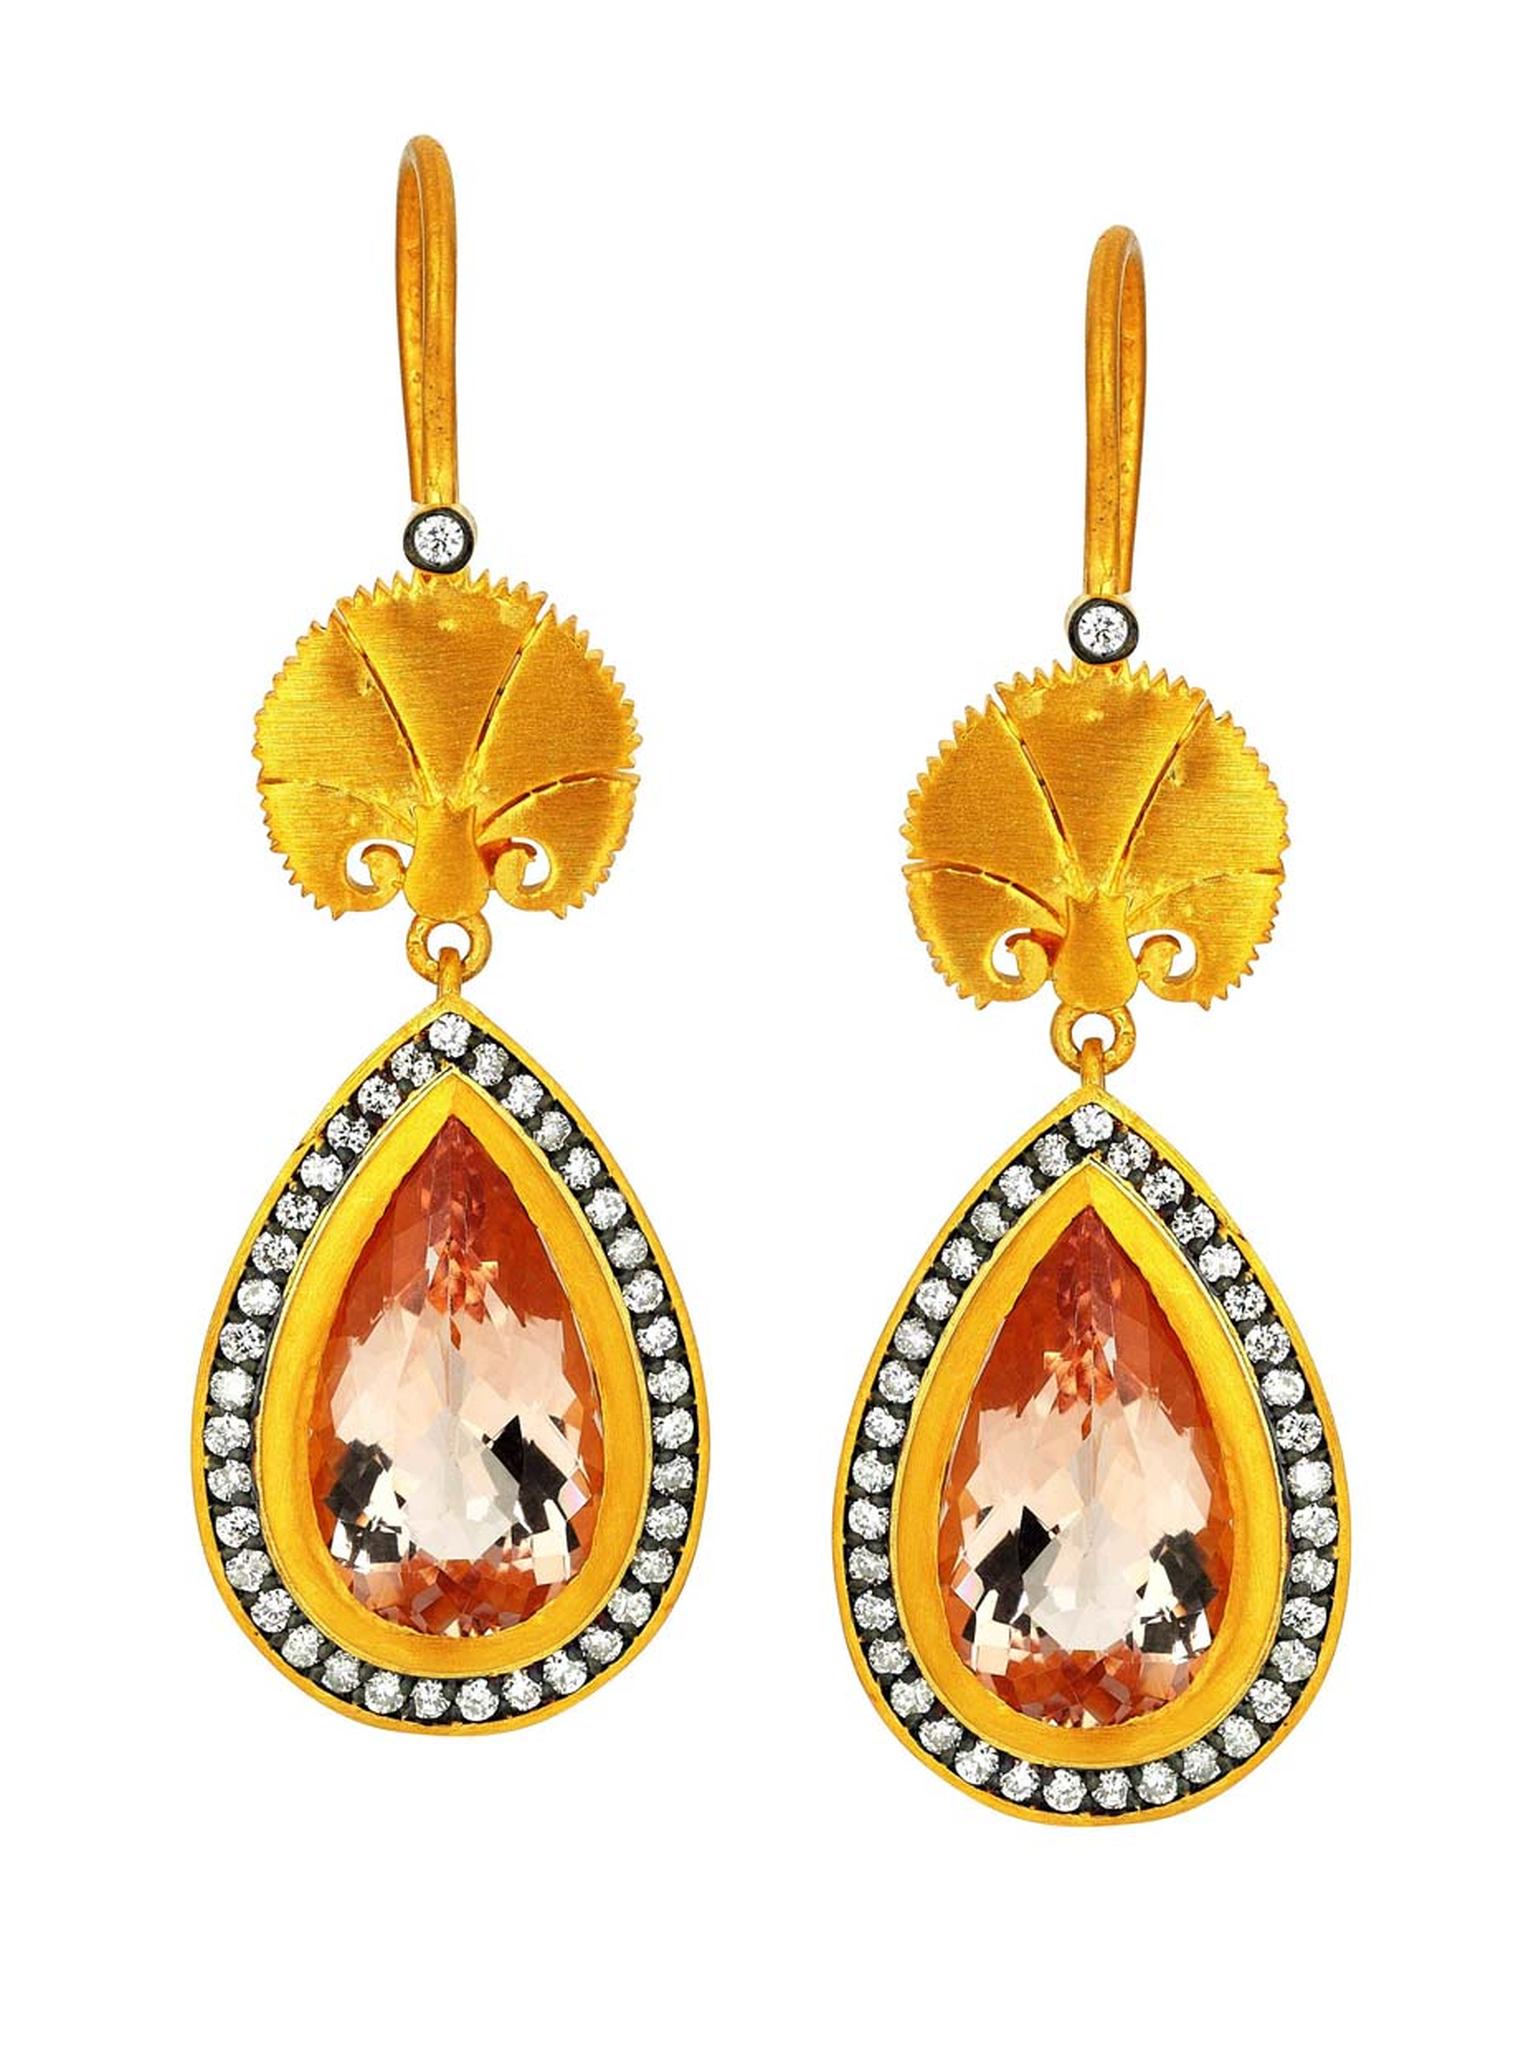 Pinar Oner Wish earrings from the Ottoman Designs collection in yellow gold with diamonds and morganite.